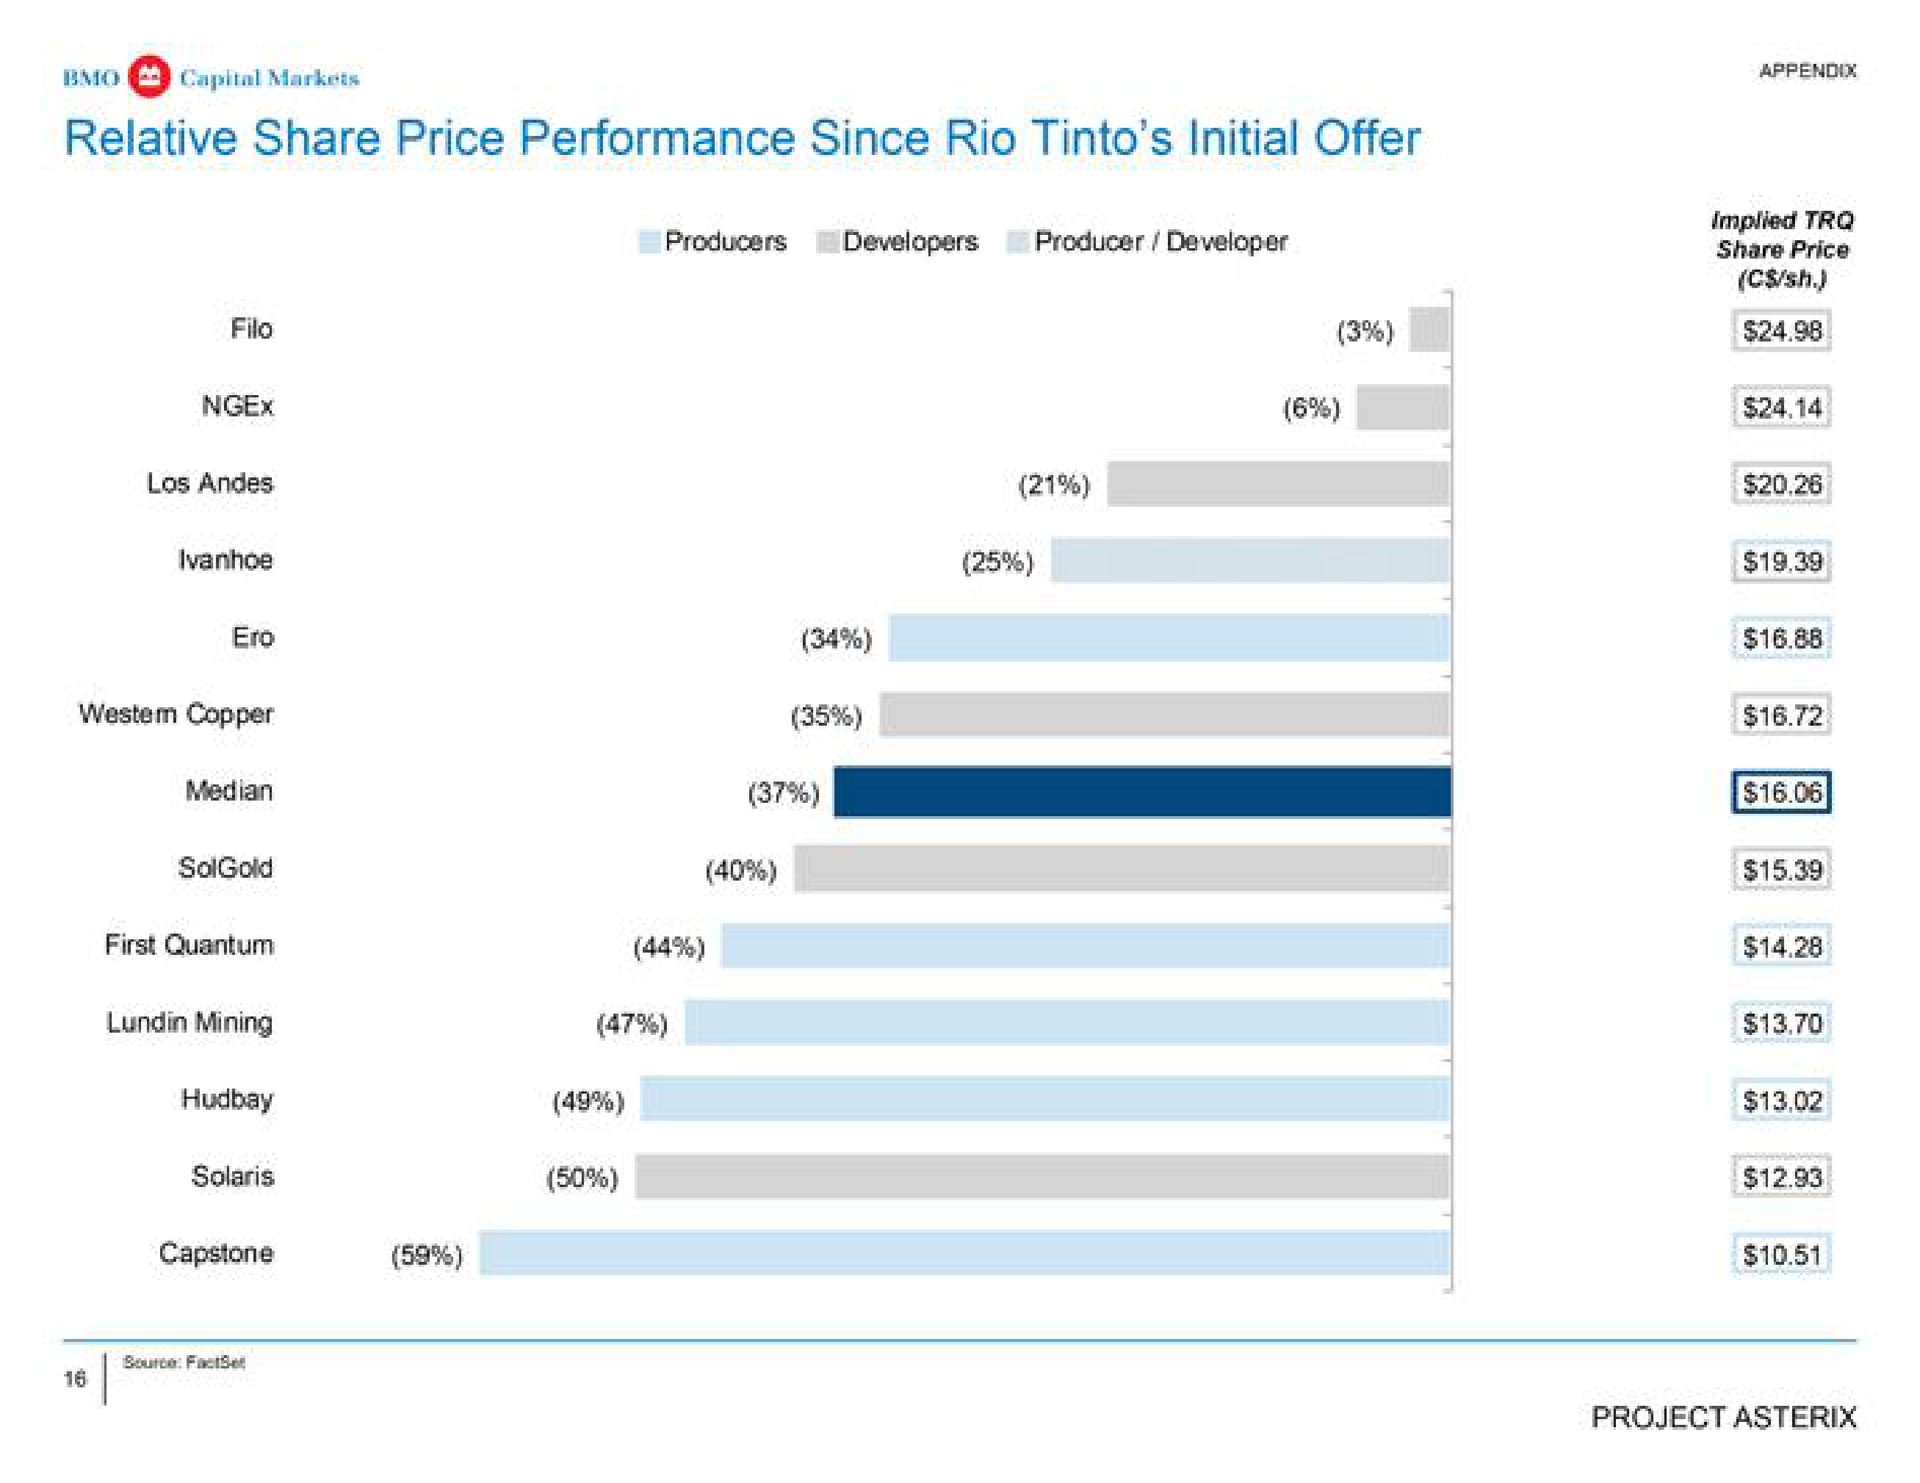 relative share price performance since rio initial offer implied share price | BMO Capital Markets